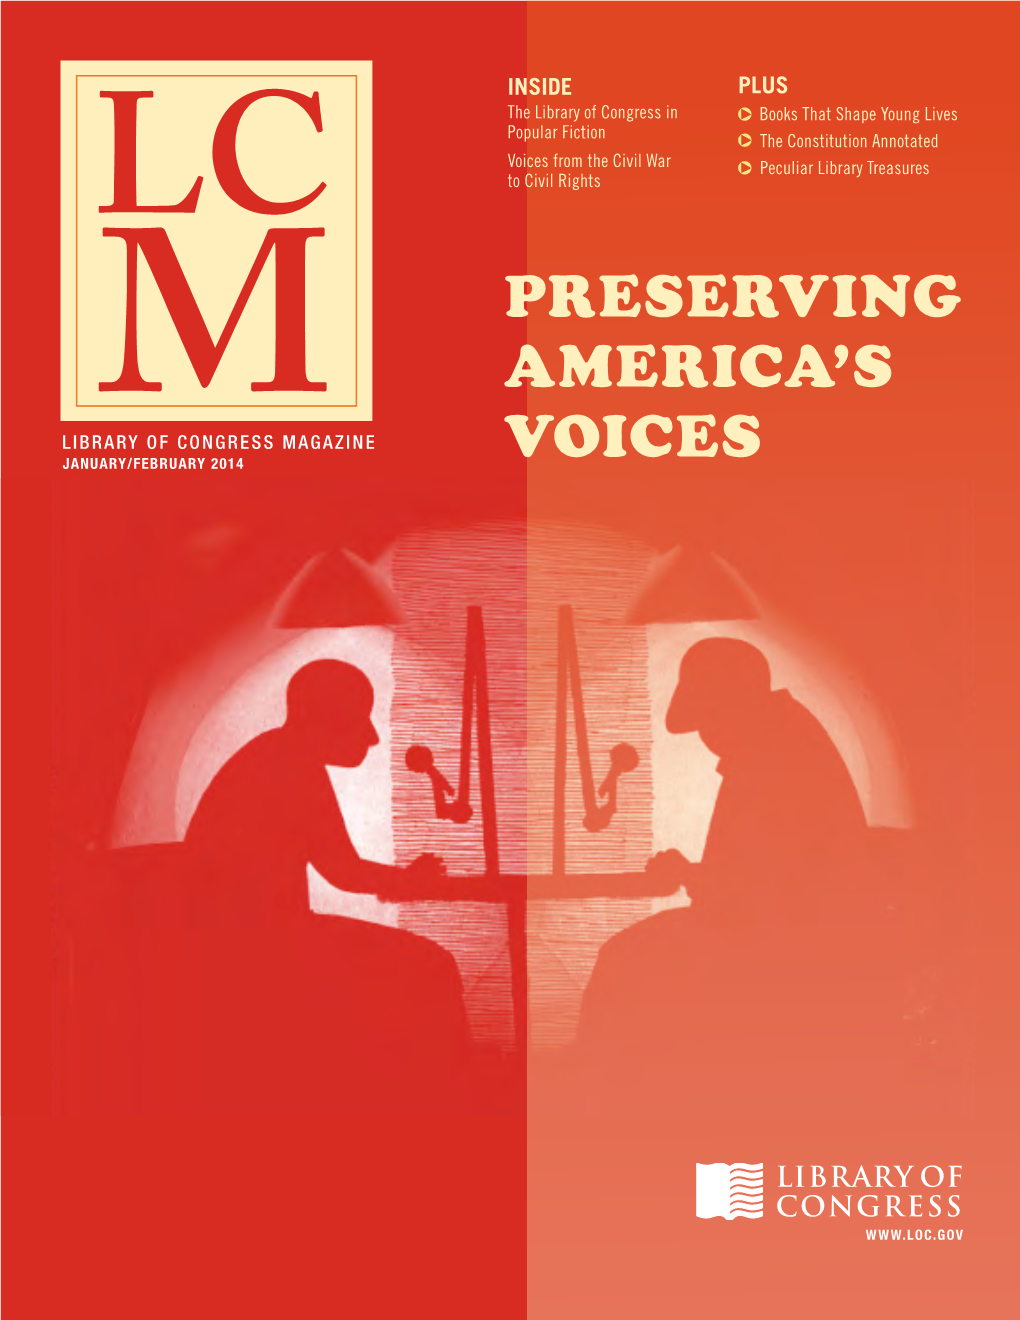 Preserving America's Voices